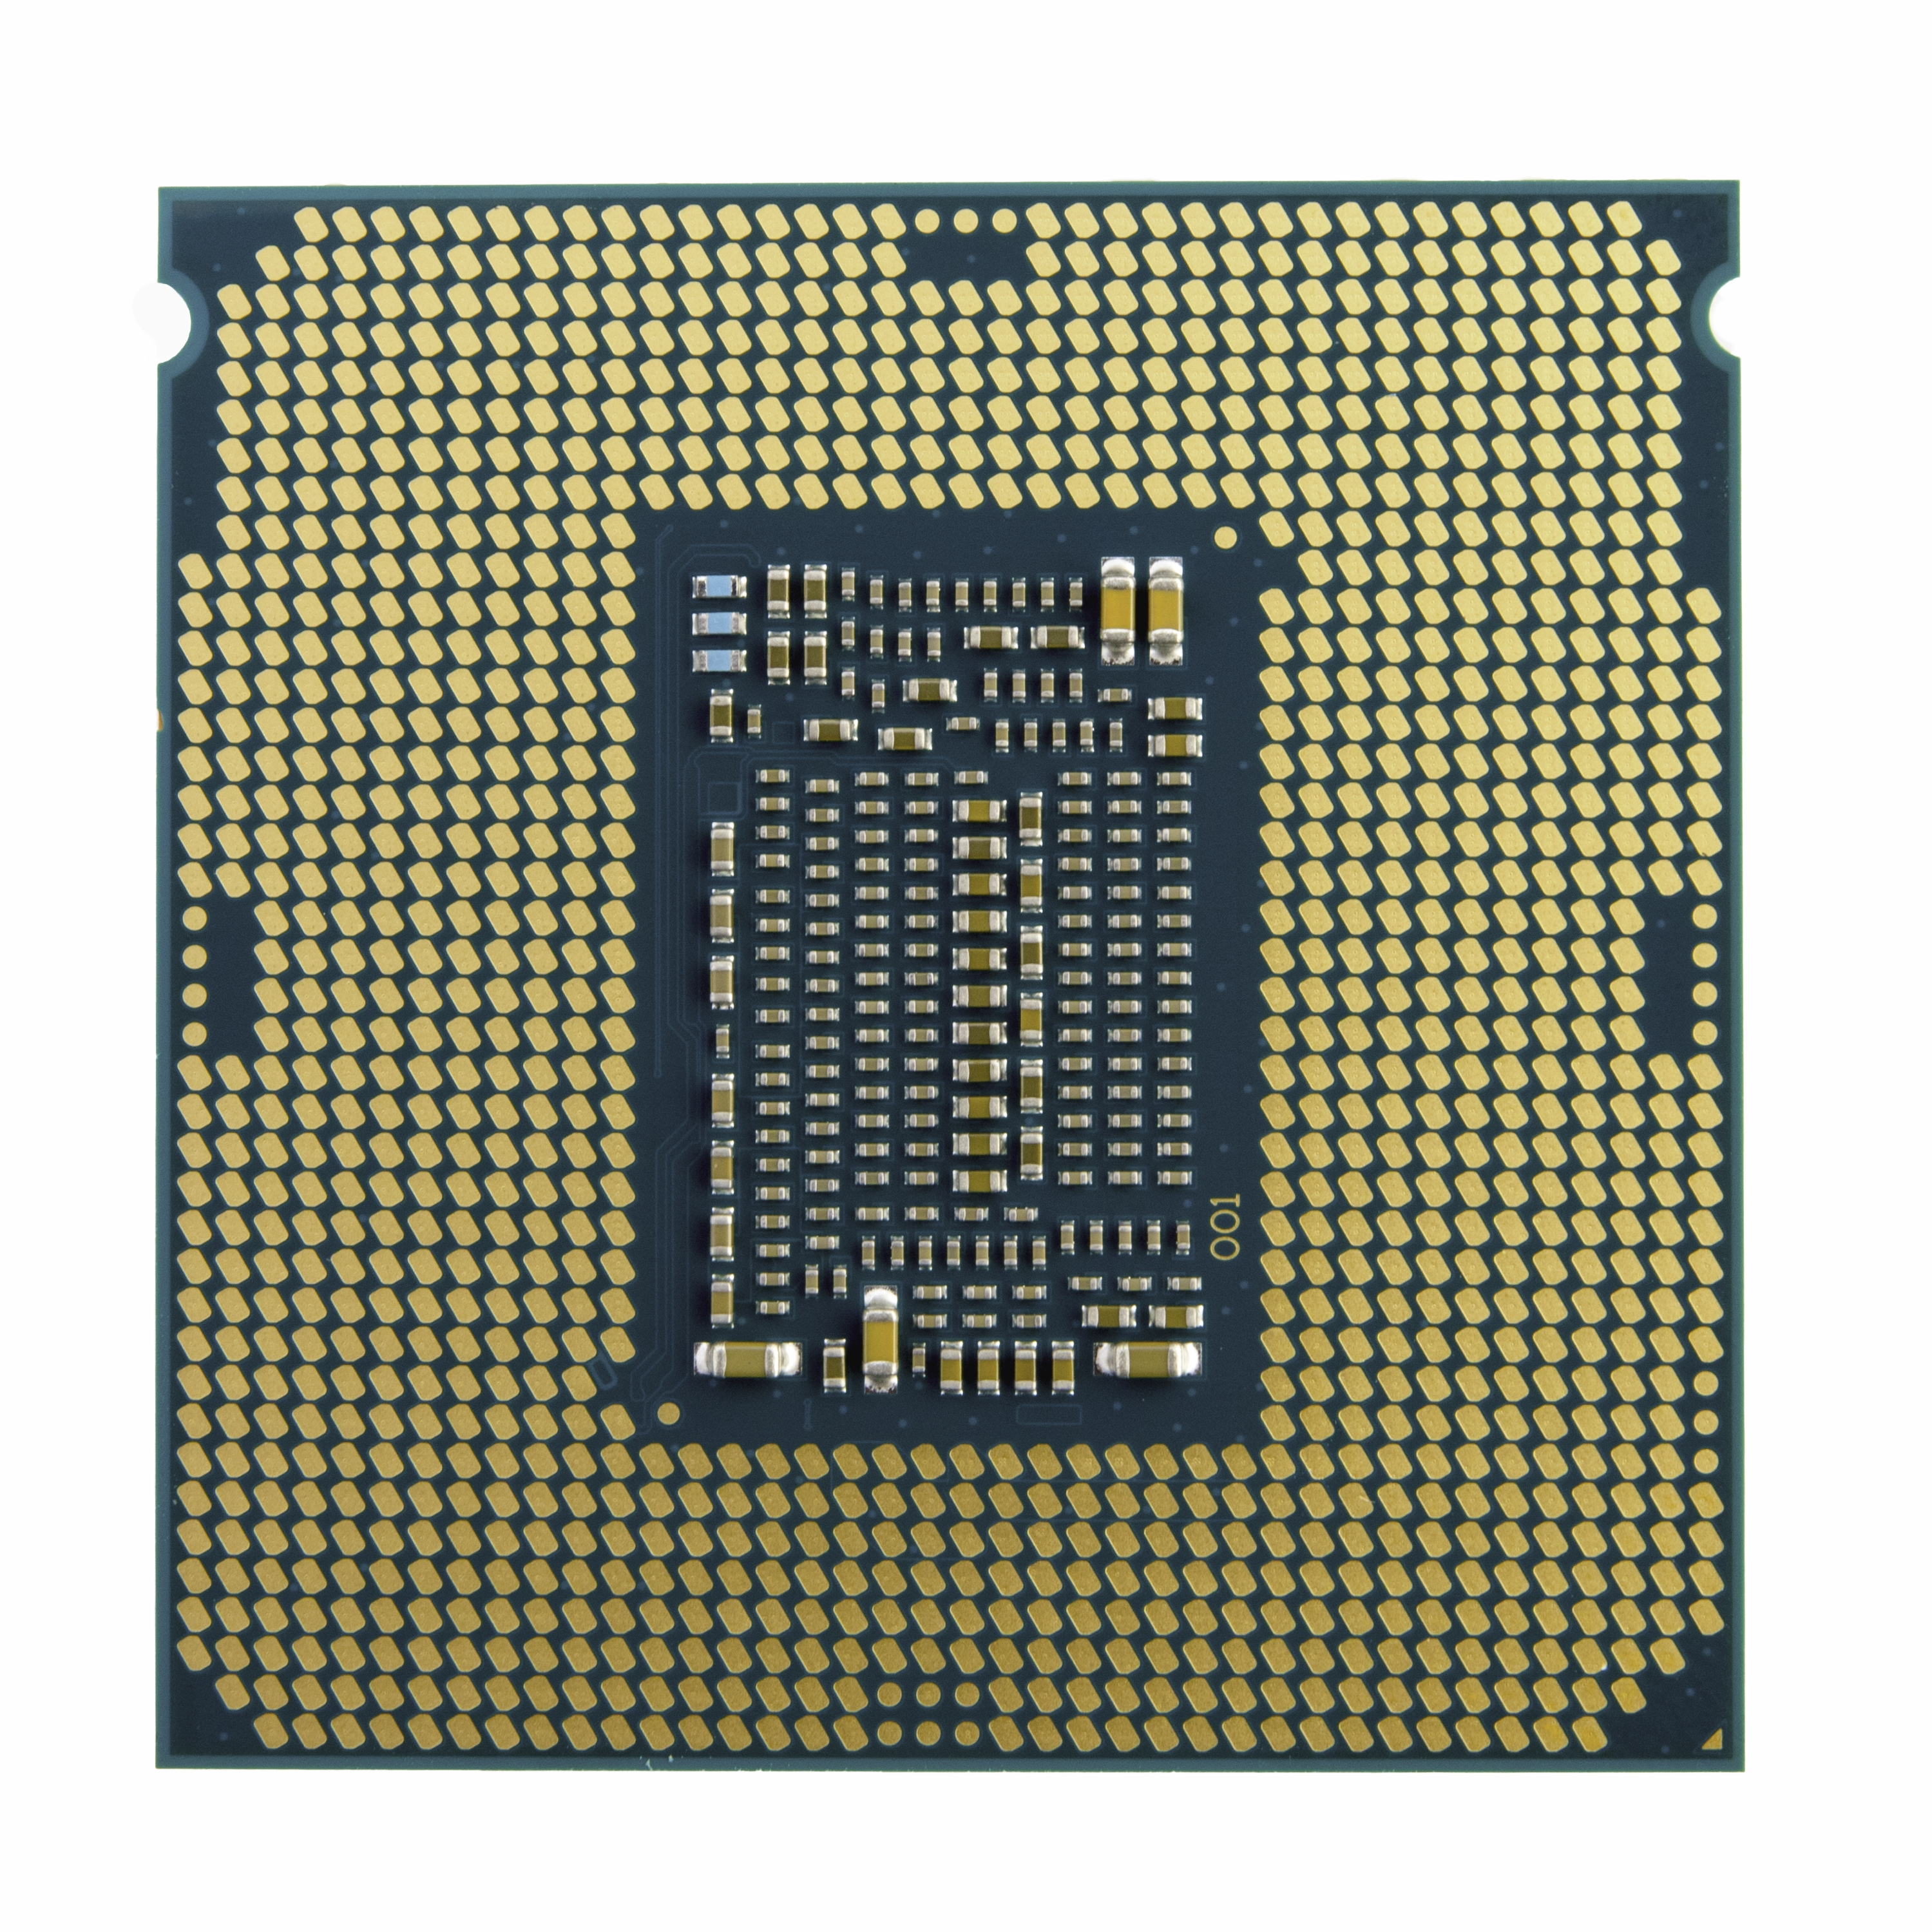 Intel Core i5-8400T, 6C/6T, 2,8/4,0 GHz, 9 MB, 65 W, S1151, UHD Graphics 630, 350/1050 Boxed